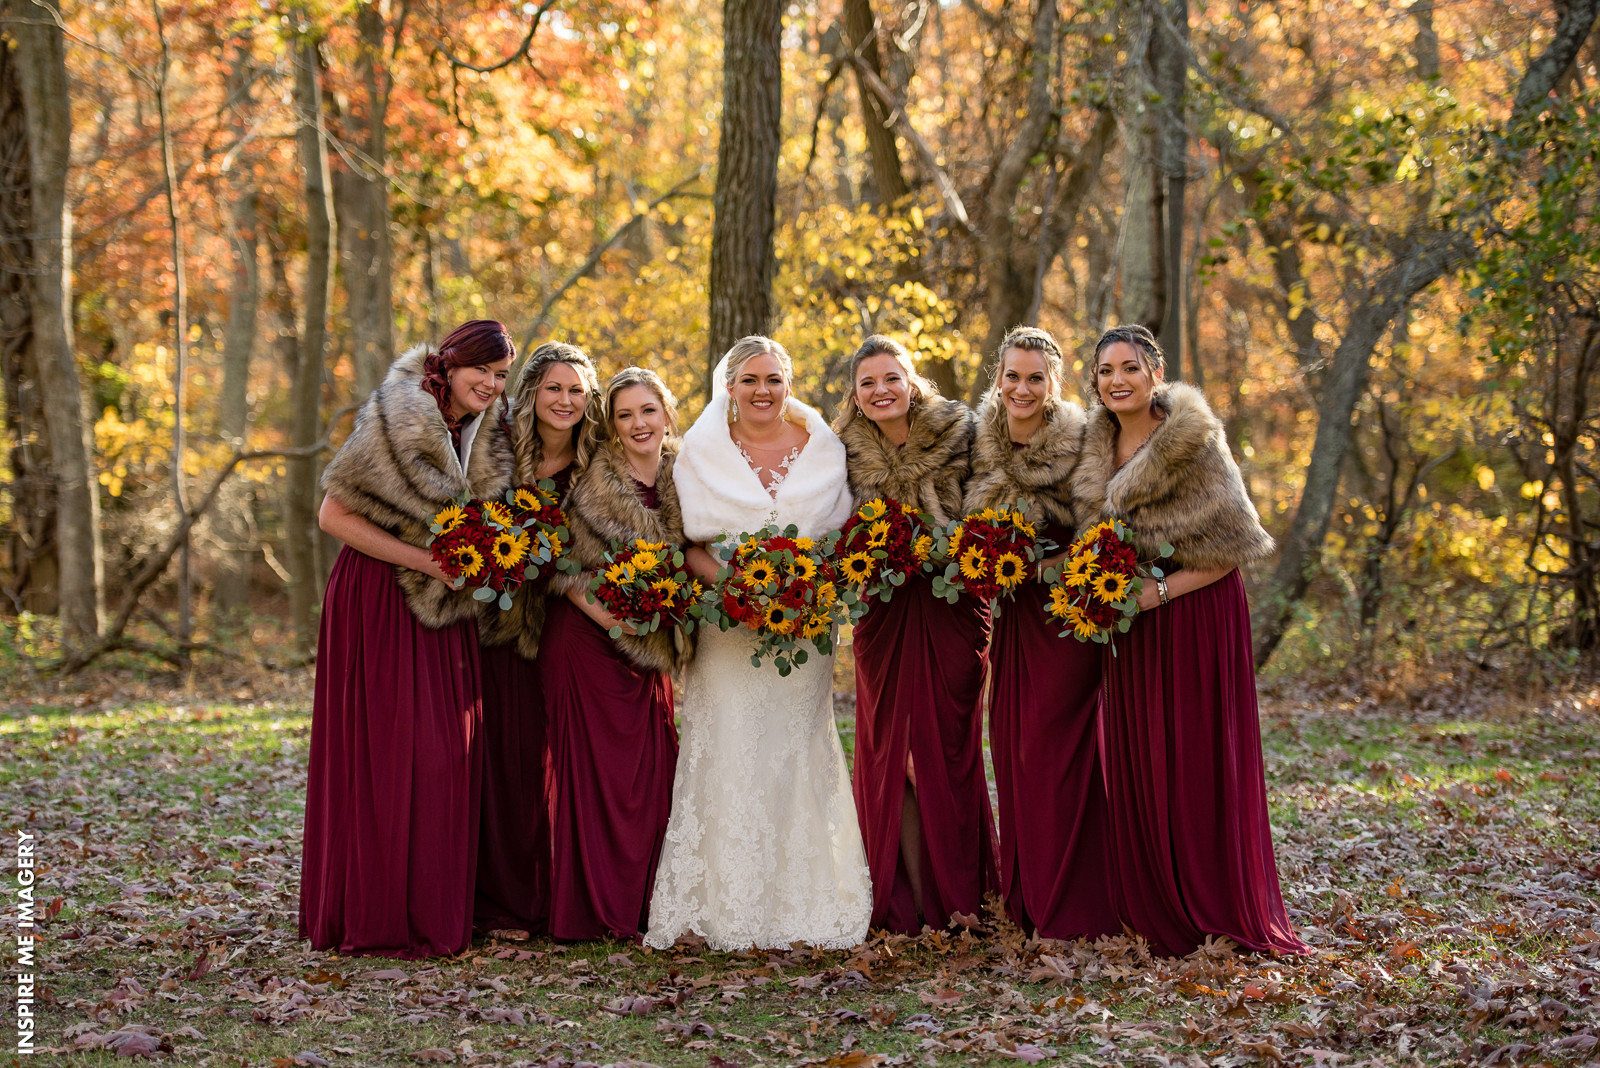 Wedding Color Ideas For Fall
 Color binations You’ll “Fall in Love” With for a Fall